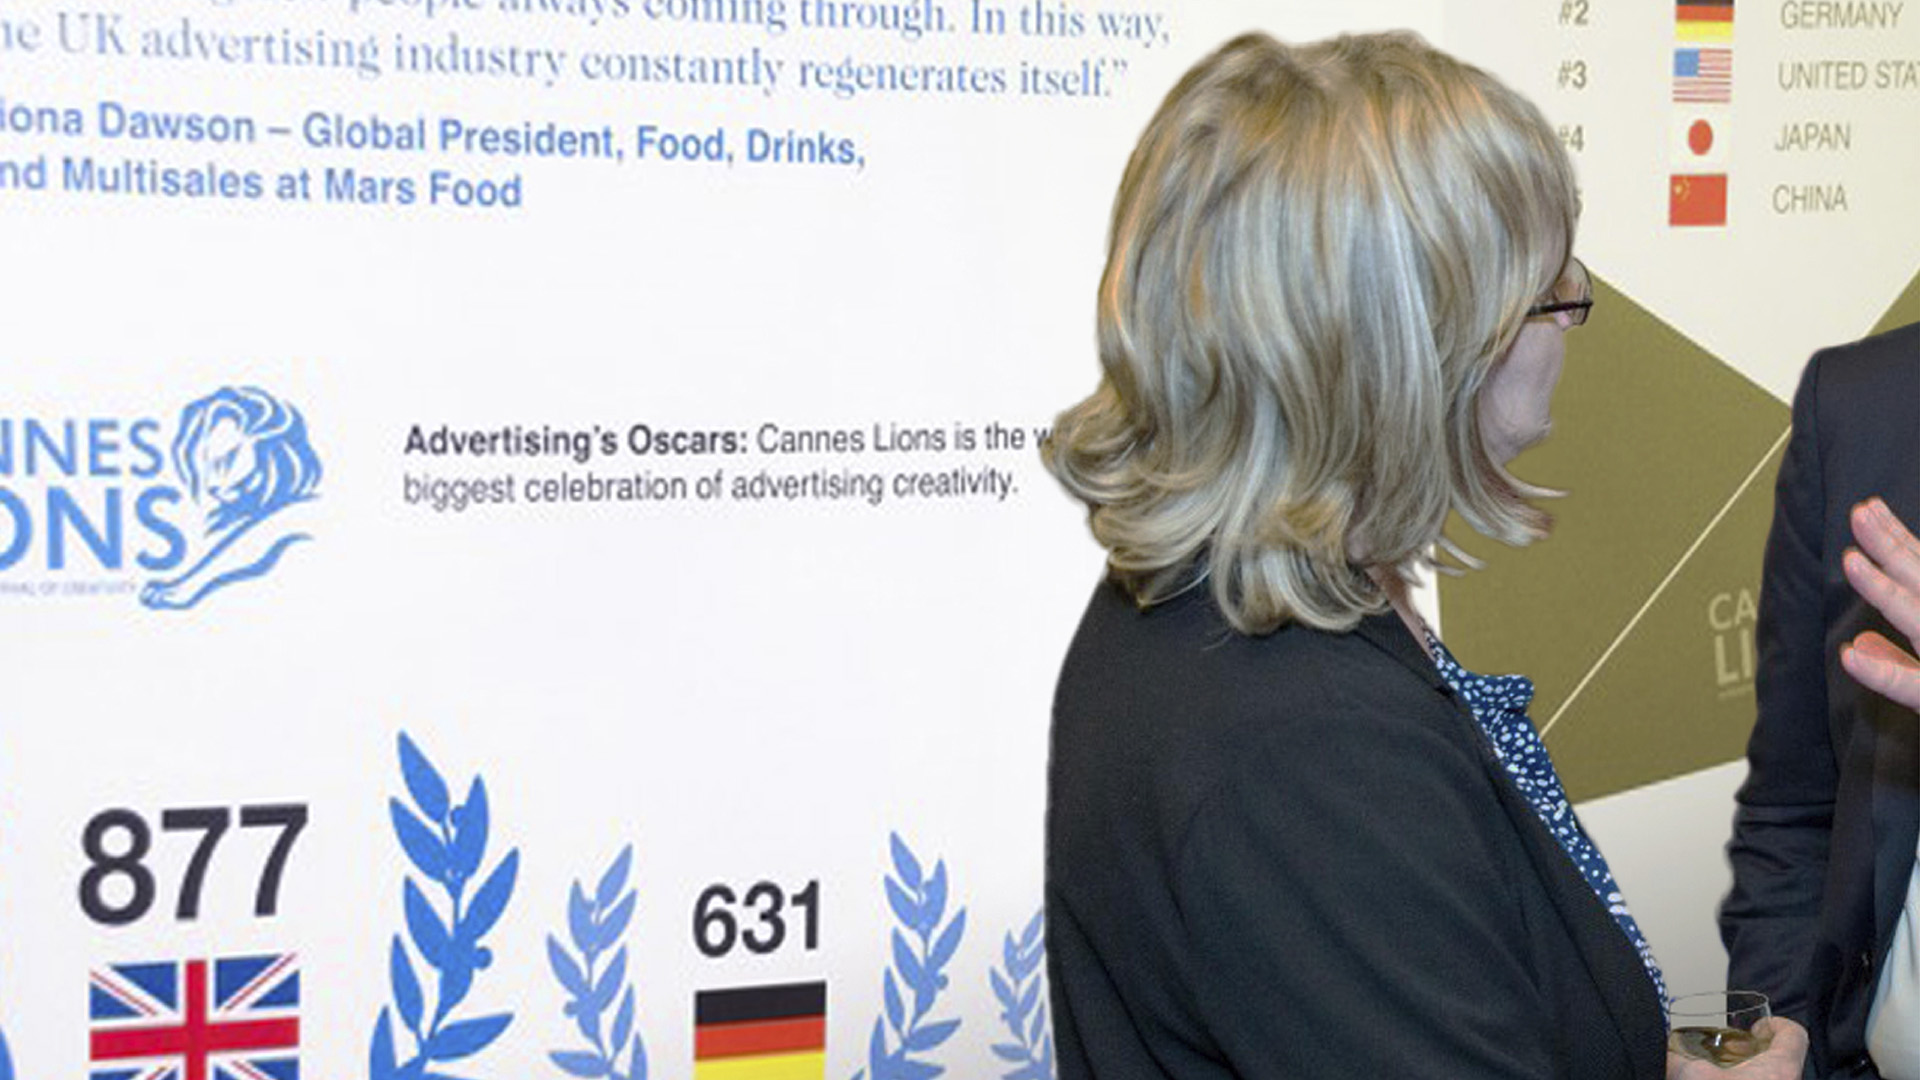 An image of the Advertising Association Ad Pays Report Parliament Event Banner on a wall with two people talking in front of it.